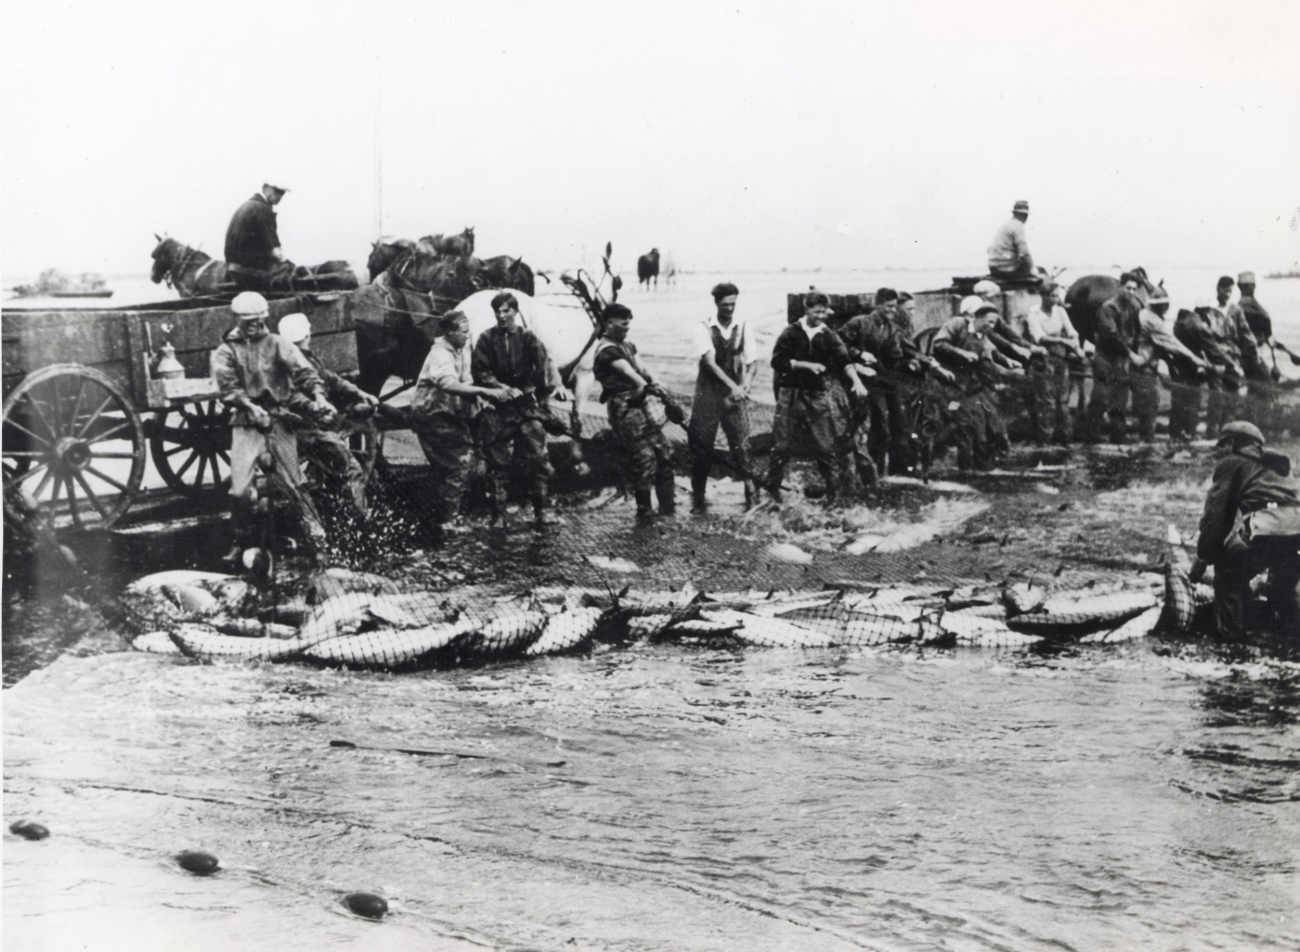 A fine haul - At Astoria, Oregon, these men hauling in a beach seine heavy withColumbia River salmon